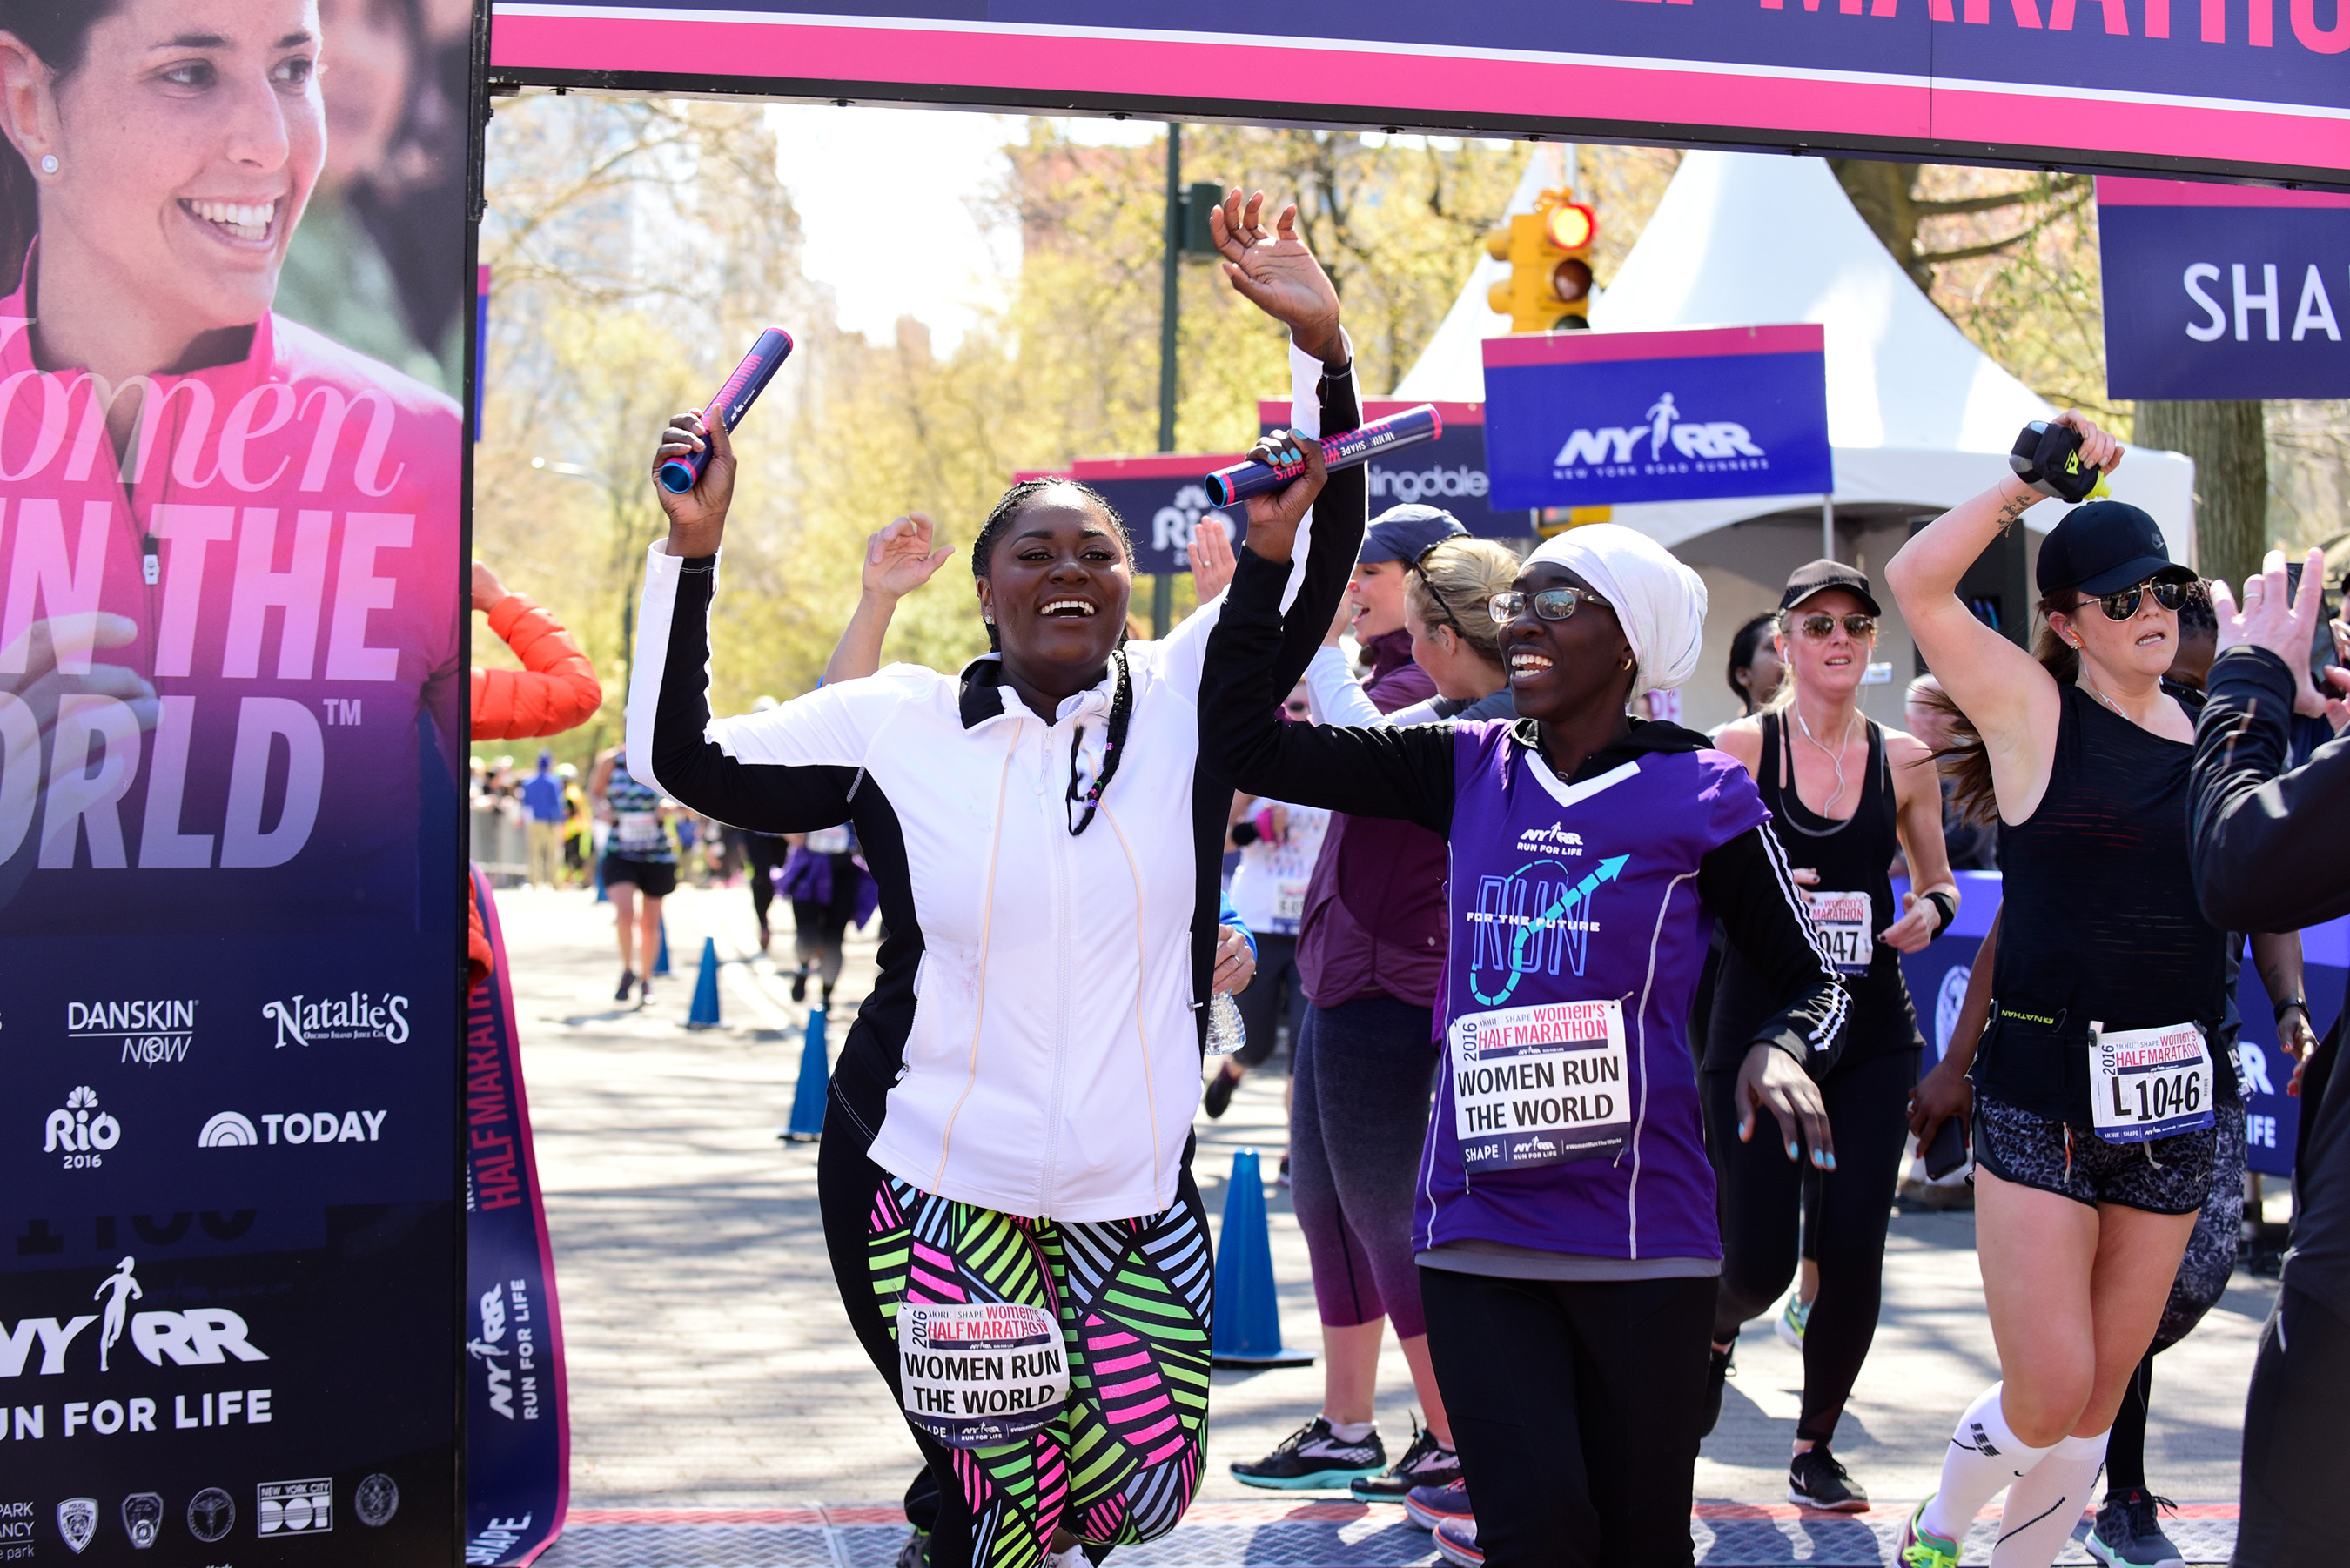 Actress Danielle Brooks and mentee Maty Sambe celebrate completing the final leg of the Women Run The World Relay at the MORE/SHAPE Women’s Half-Marathon in New York’s Central Park on April 17, 2016.